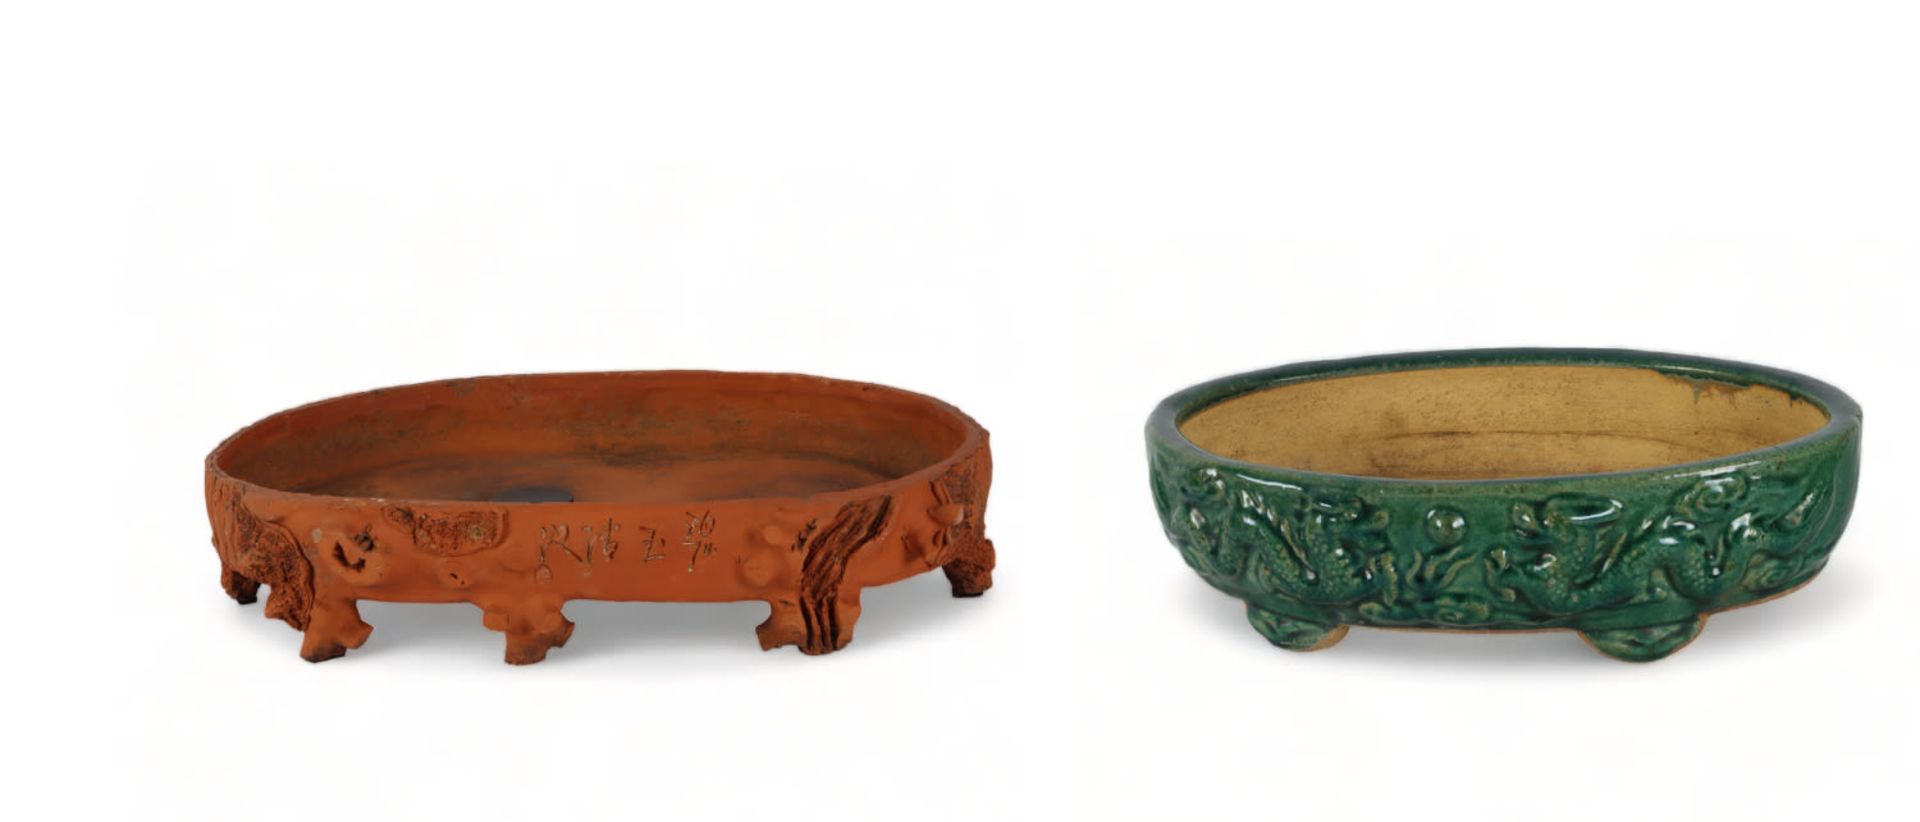 A Chinese glazed pottery and a Yixing stoneware jardinière, 20th Century